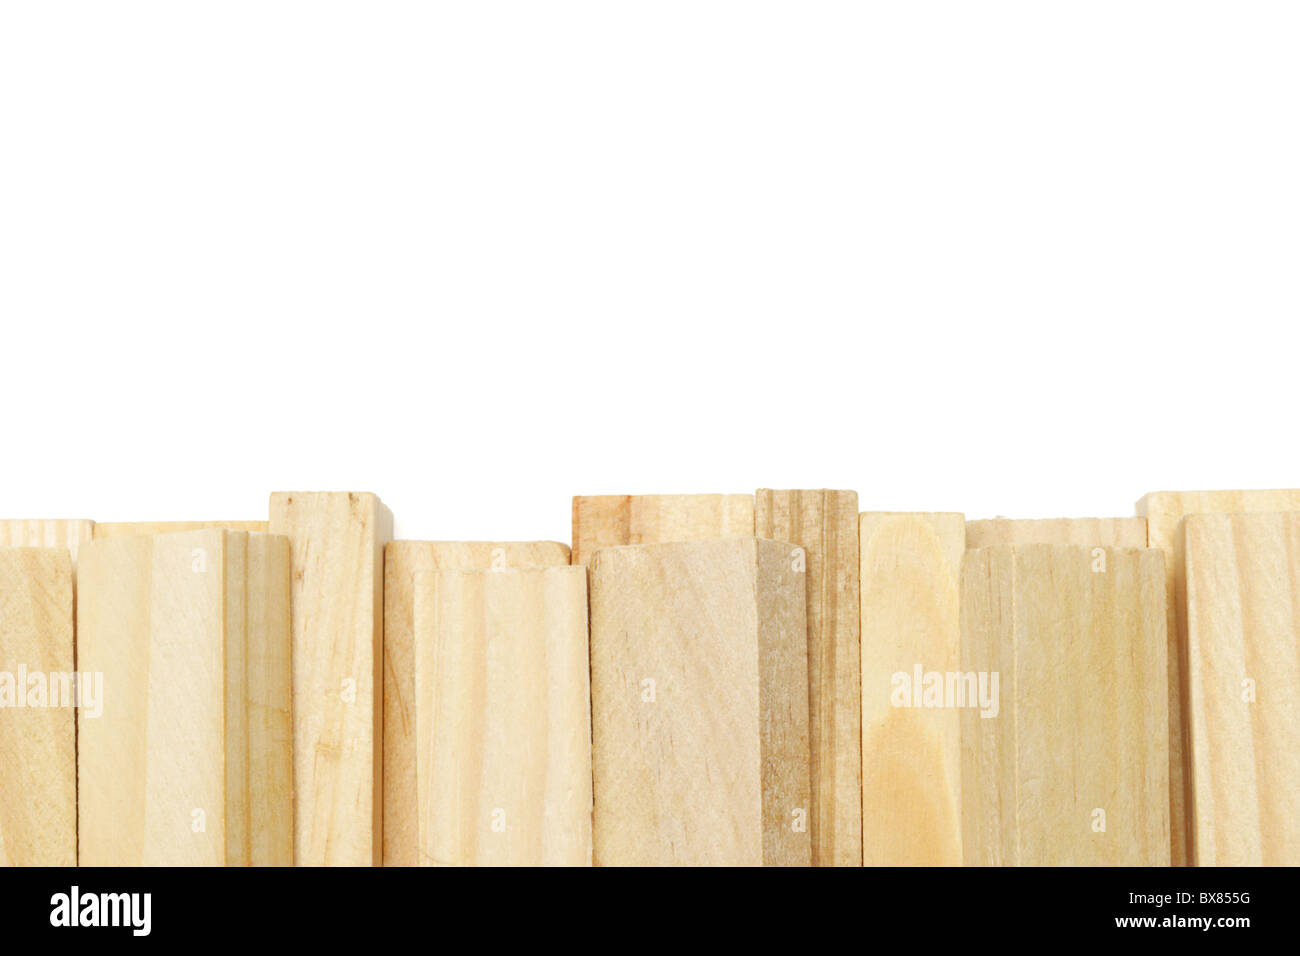 Wooden building blocks border on whte background Stock Photo